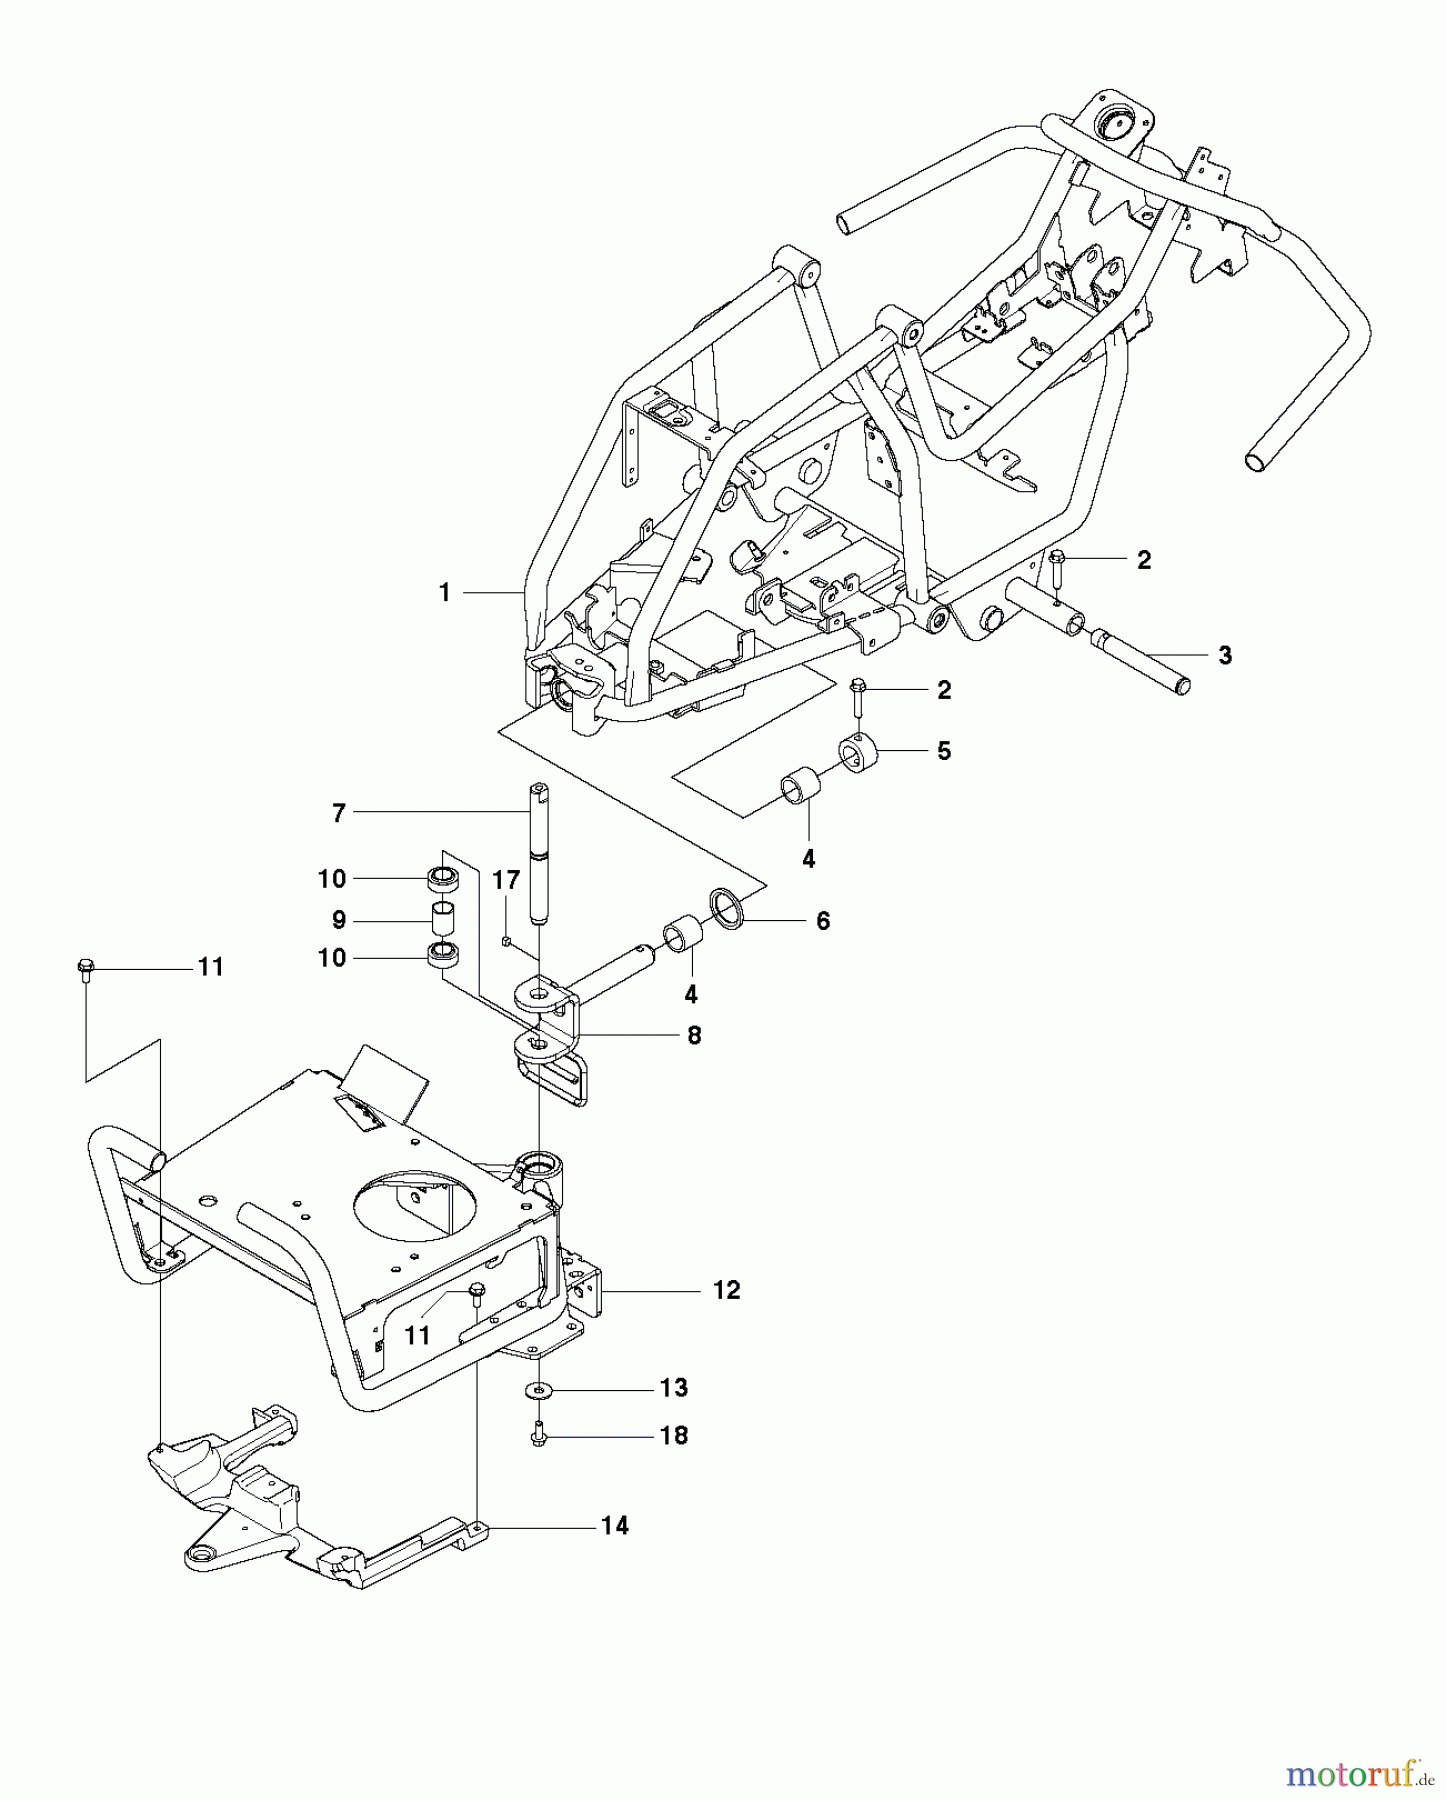  Jonsered Reitermäher FR2312 MA (966639885, 966639801) - Jonsered Rear-Engine Riding Mower (2011-02) CHASSIS ENCLOSURES #1